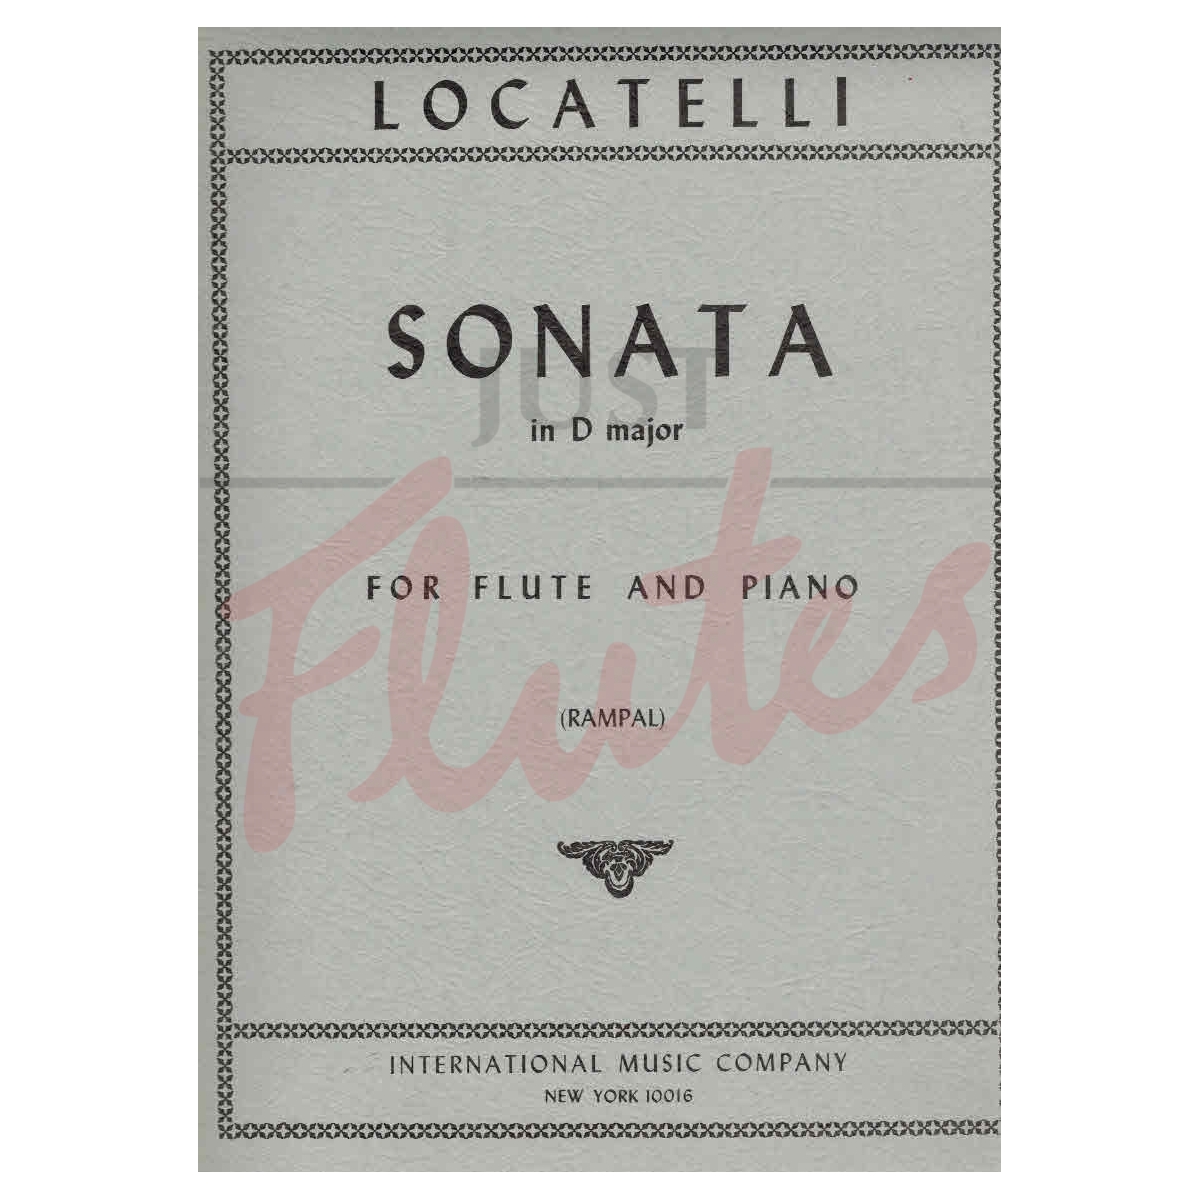 Sonata in D major for Flute and Piano